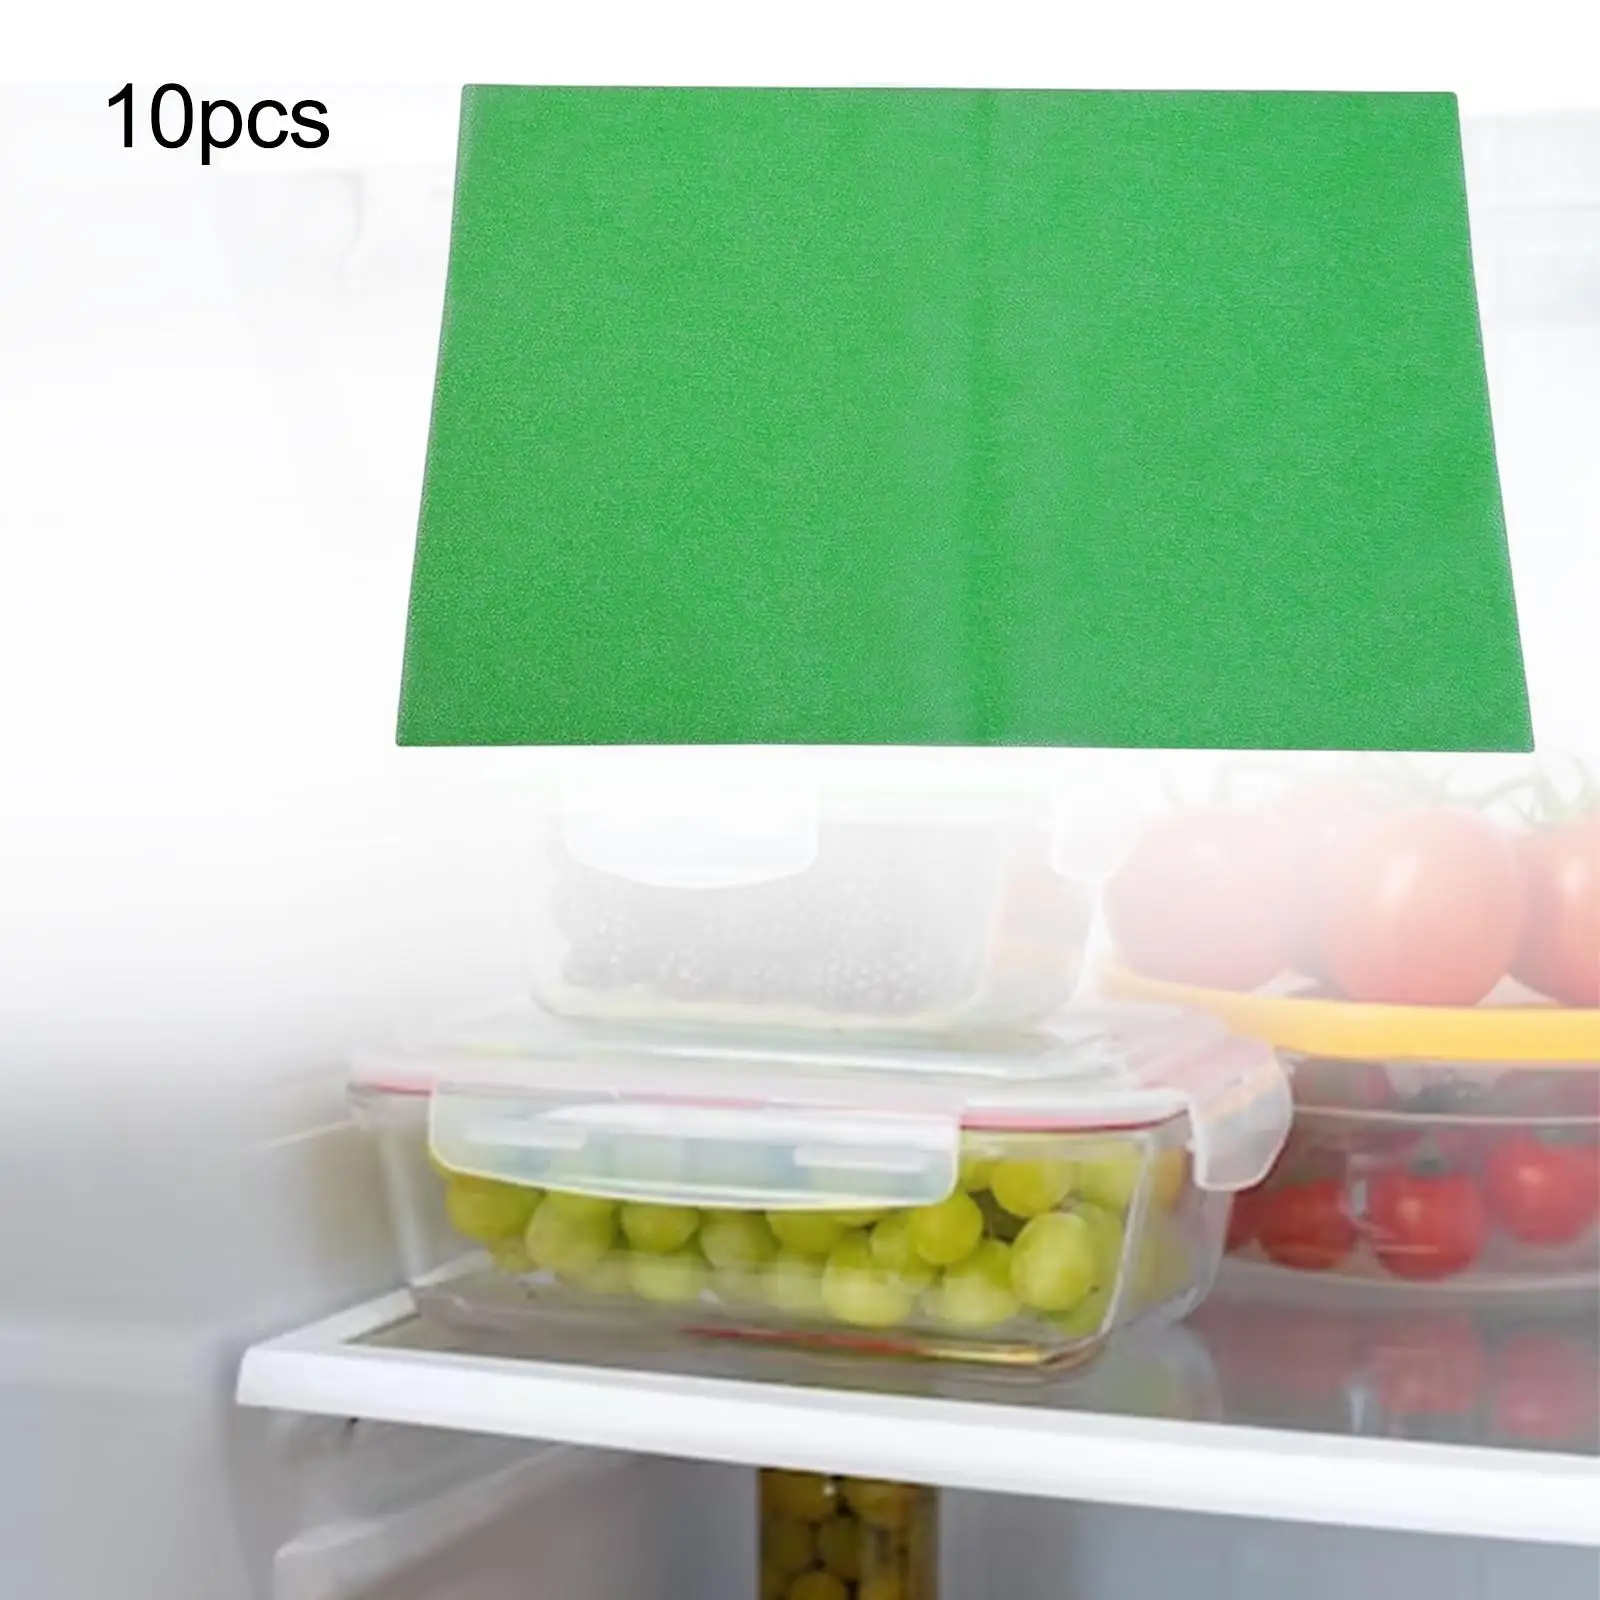 10x Multifunctional Fridge Mats Liners Drawer Fridge Cover Kitchen Table Pad Kitchen Gadgets Accessories Kitchen for Cupboard